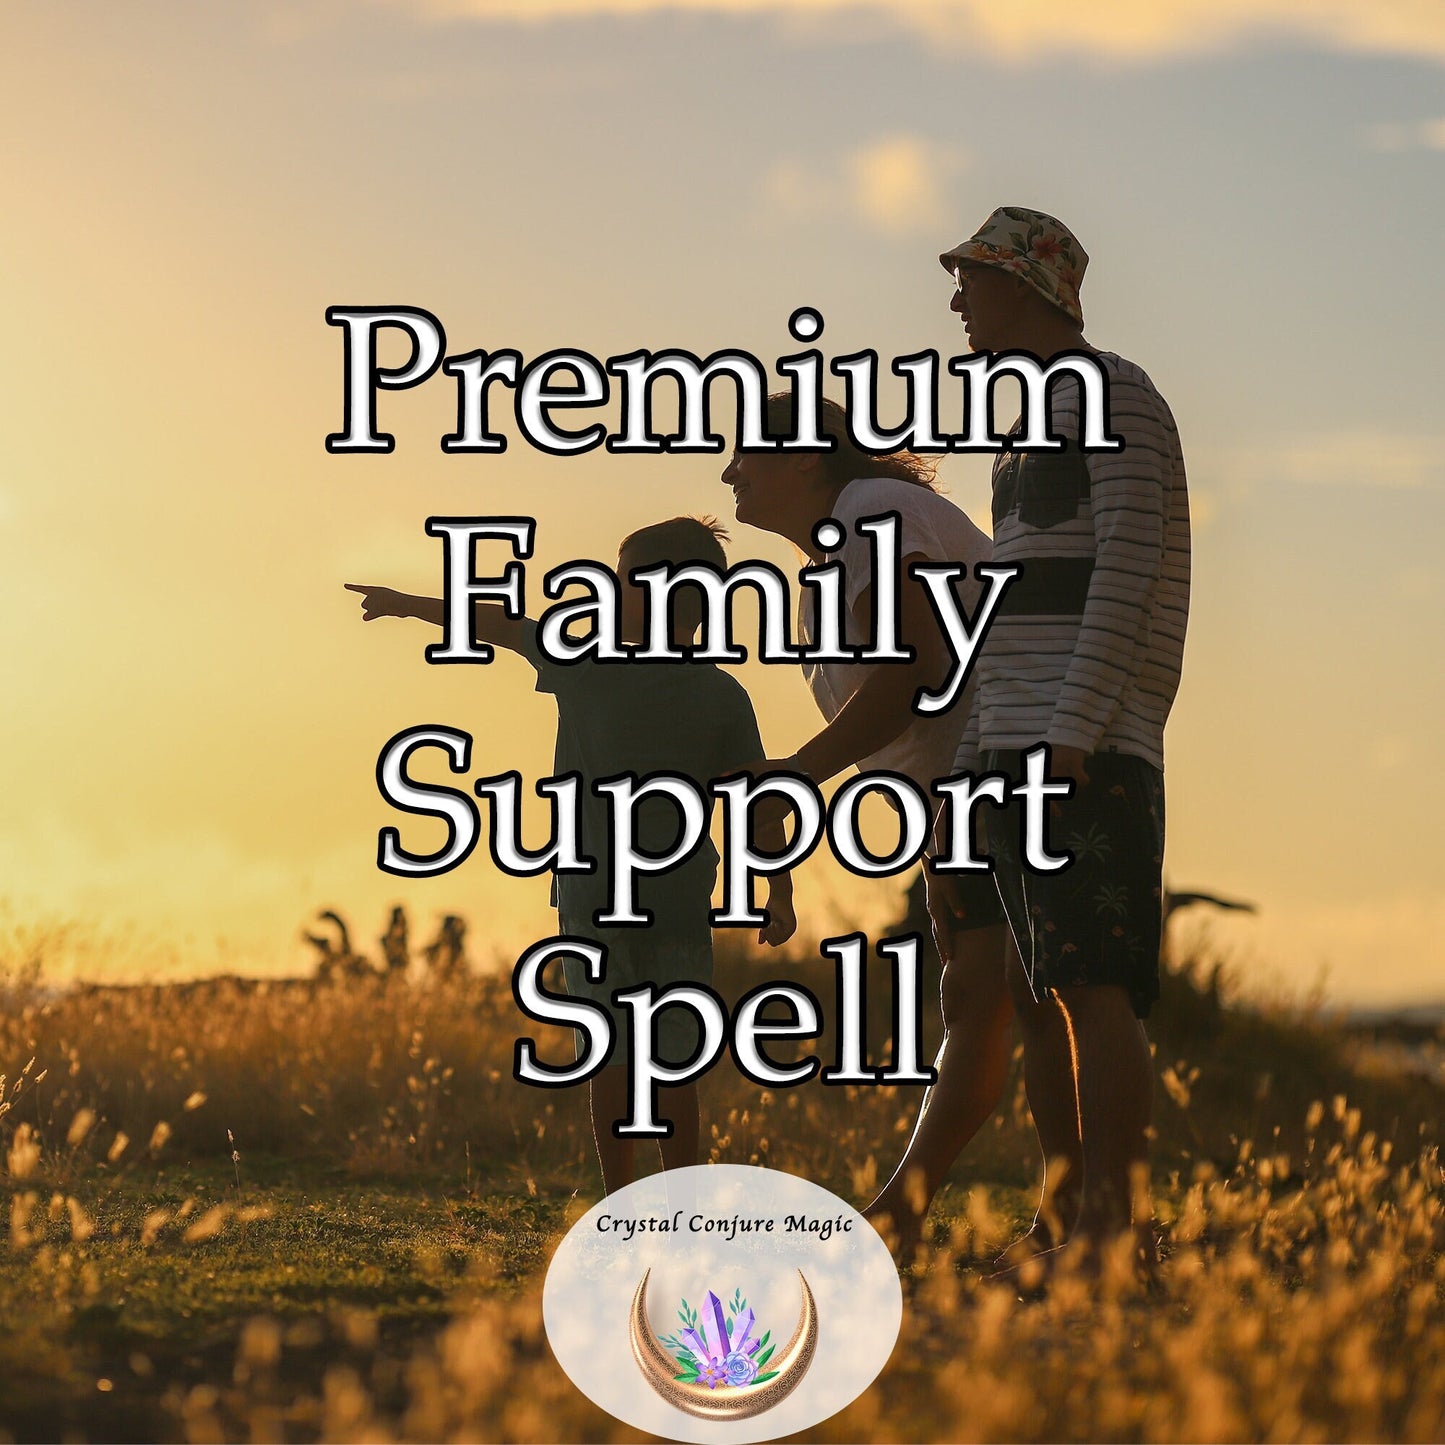 Premium Family Support Spell - love, understanding, and compassion in your family, stimulating amplified levels of support